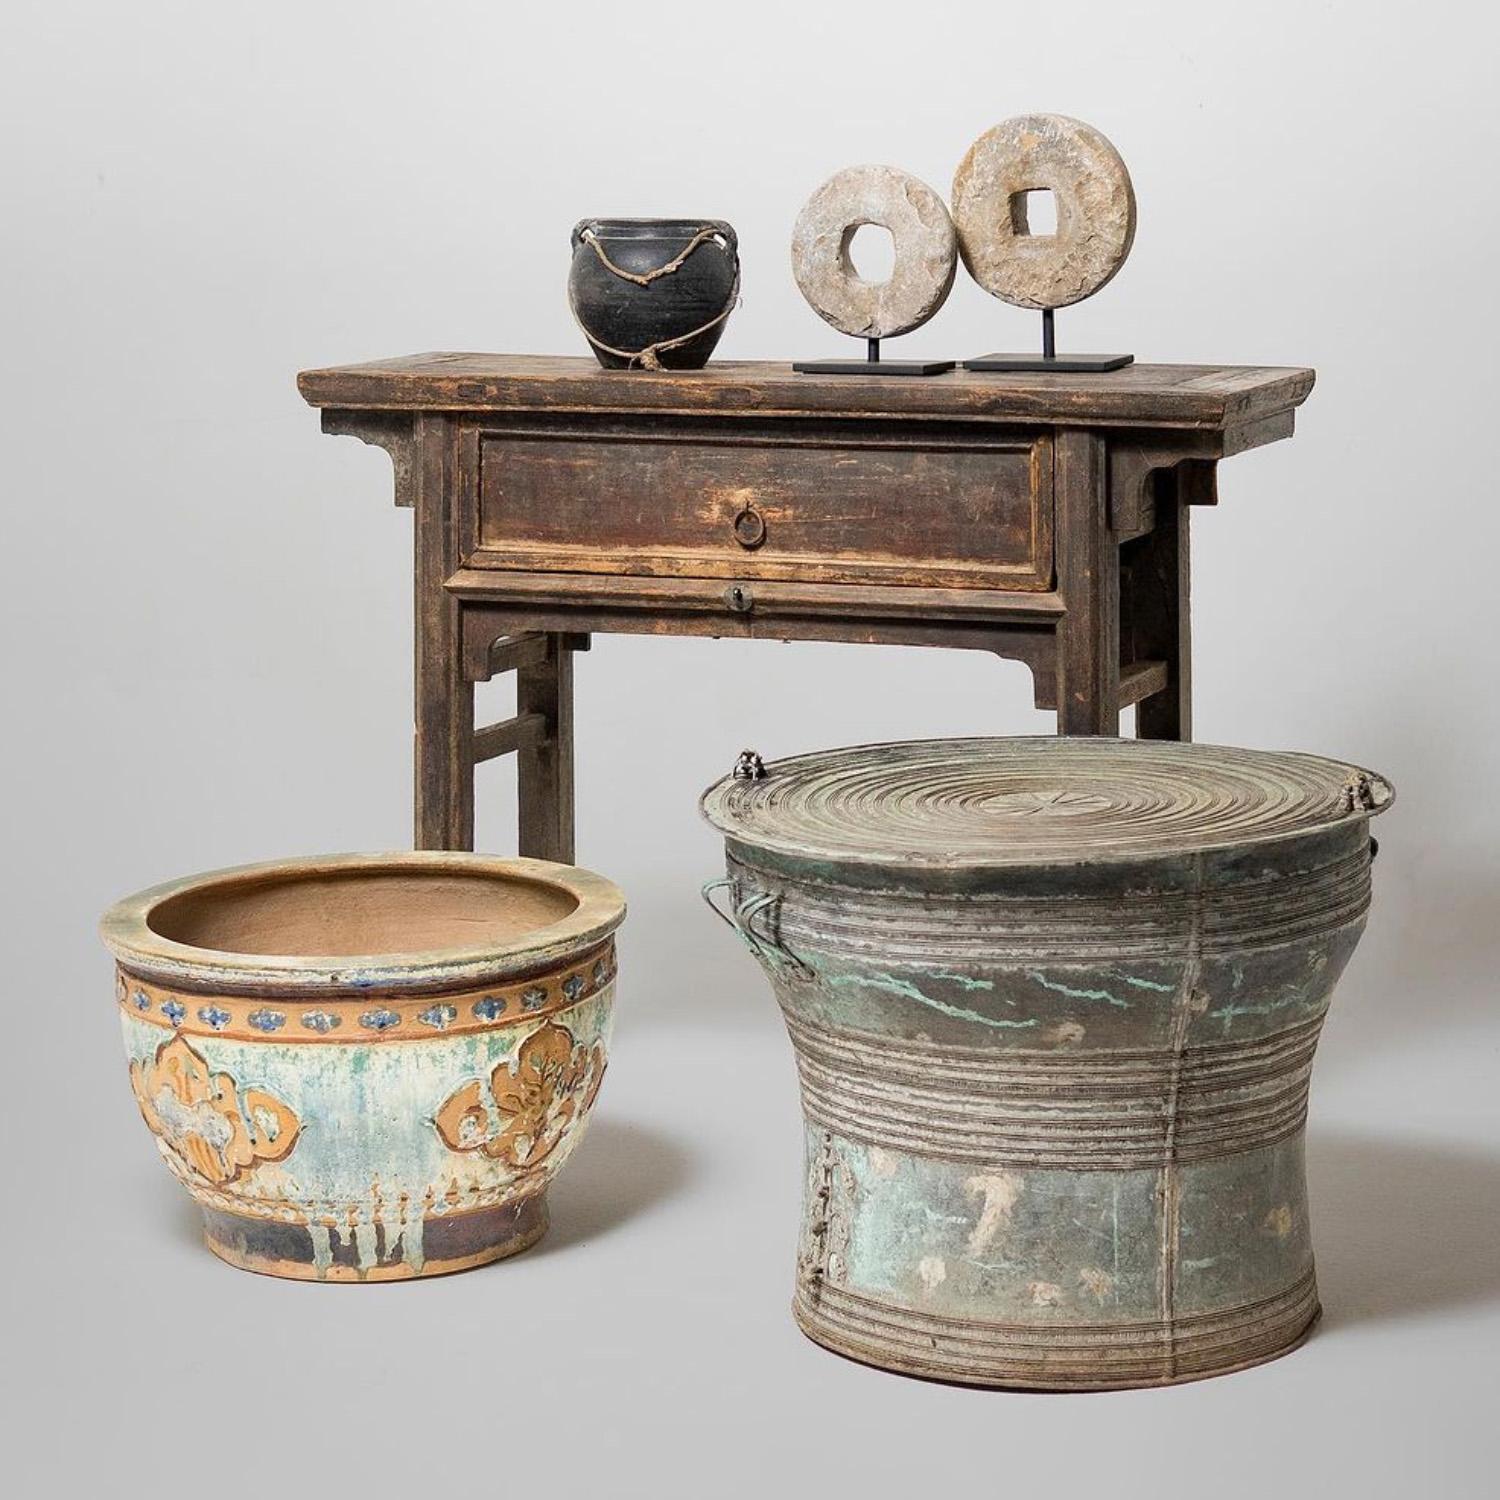 This offering table from China's Shanxi province dates to the early 19th century and was originally used to display an ancestor shrine in a provincial household. Incense, candles, and fruits would have covered the narrow table as offerings to the